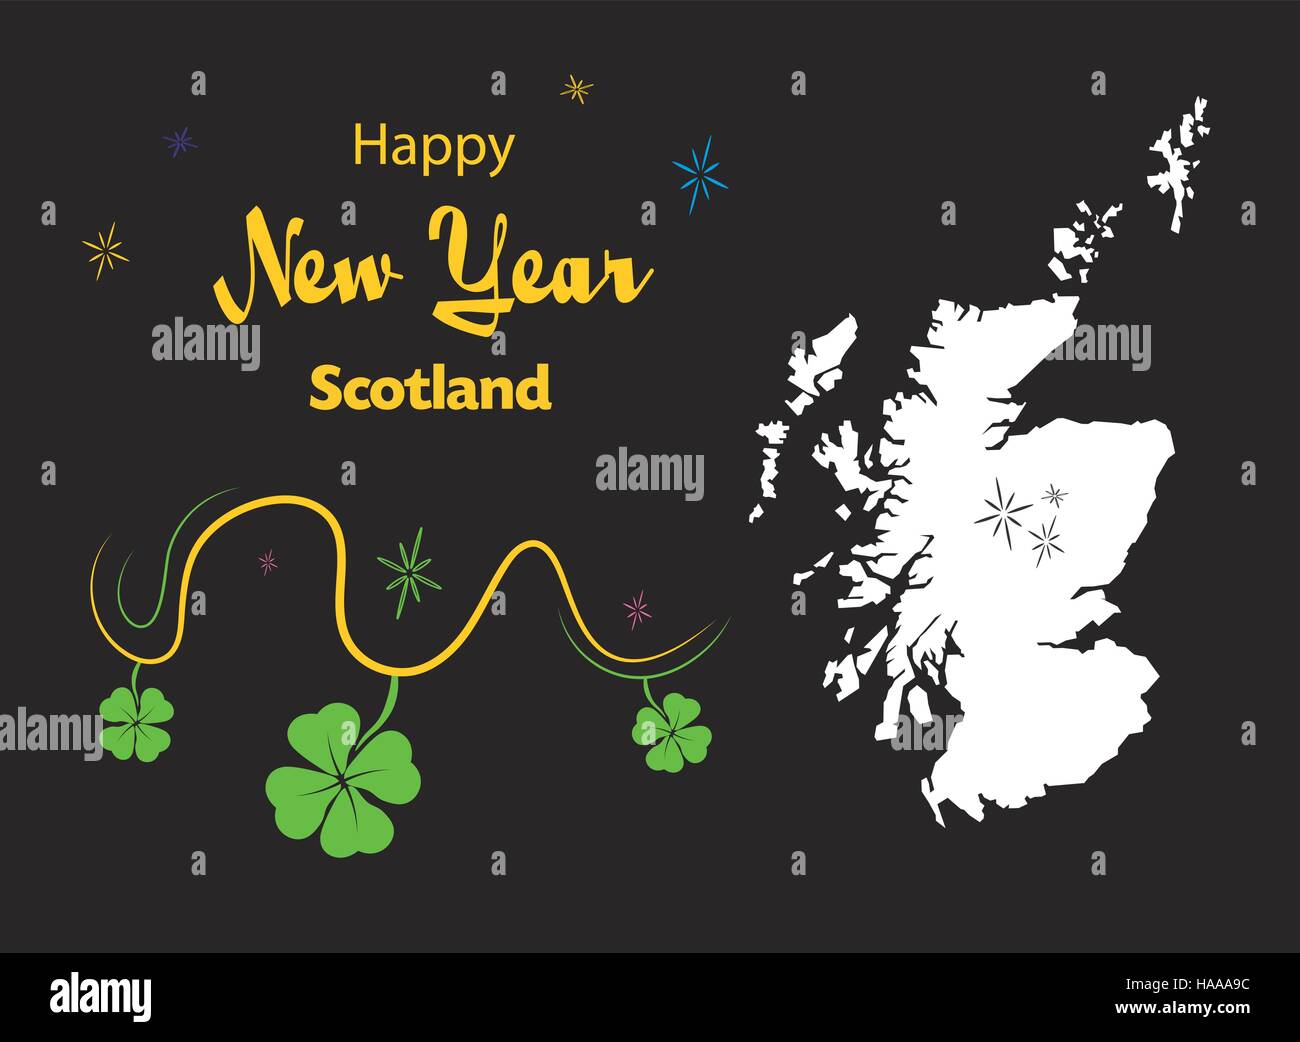 Happy New Year illustration theme with map of Scotland Stock Vector